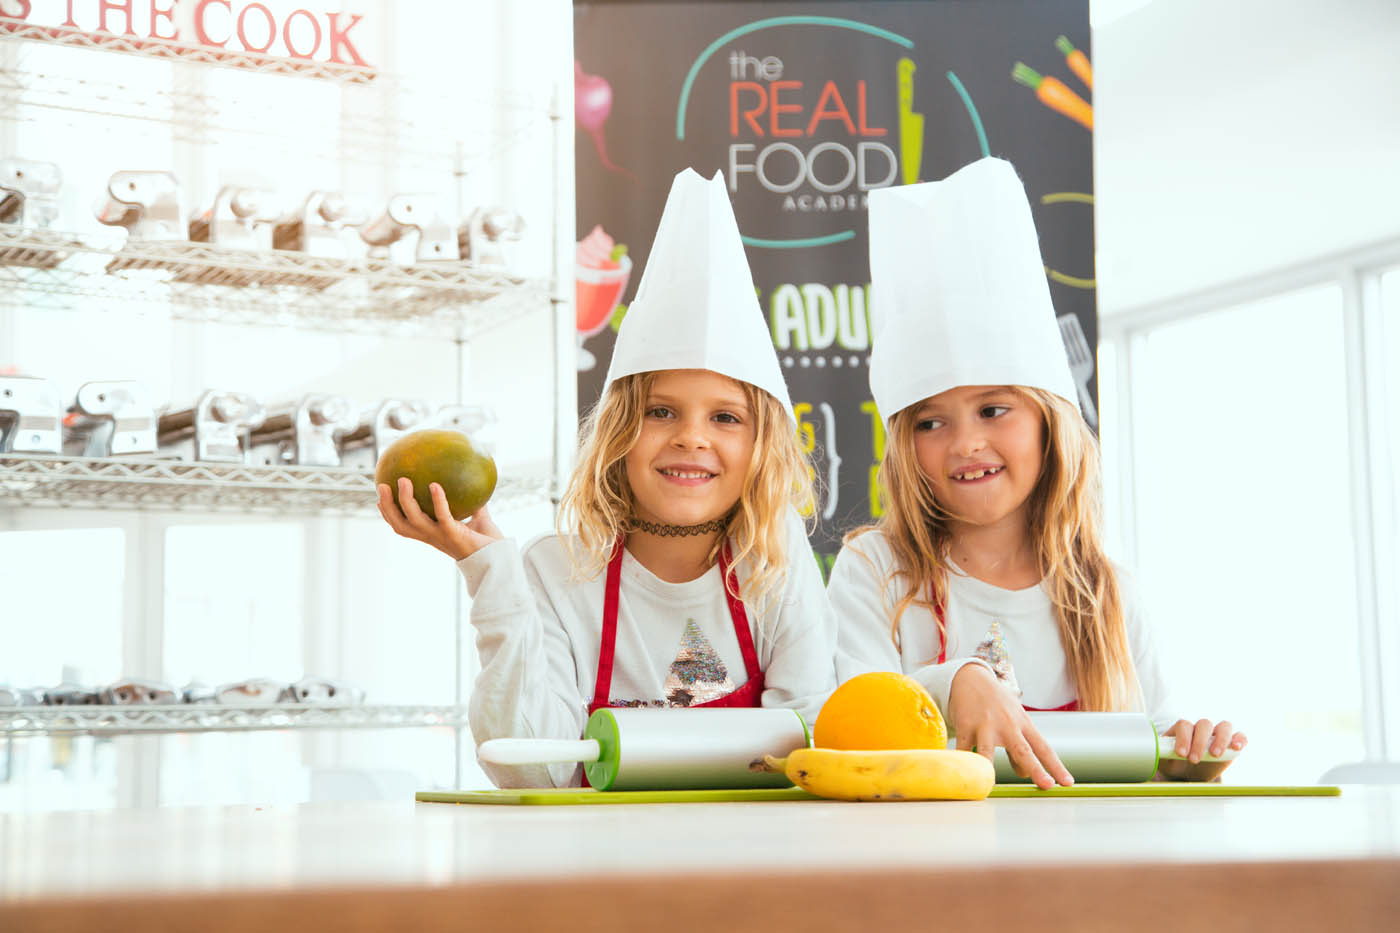 The Real Food Academy Miami - Fun Camps for Summer in Miami, FL. The Real Food Academy